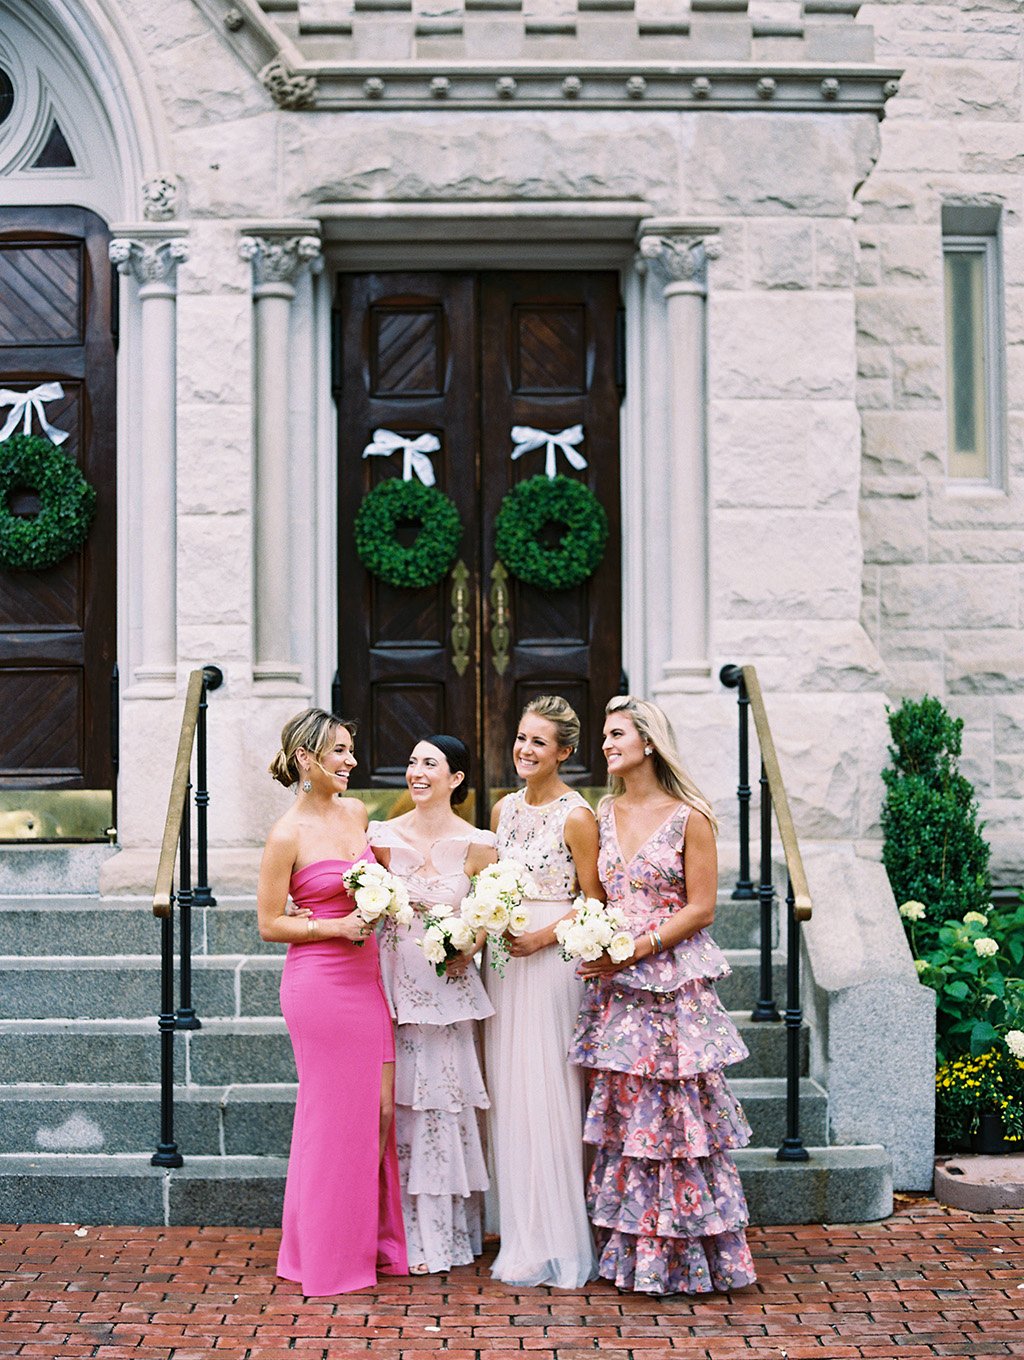 mix-and-match bridesmaids gowns pink bridal party pink bridesmaids gowns abby jiu Elizabeth Caccia Michael Kelly